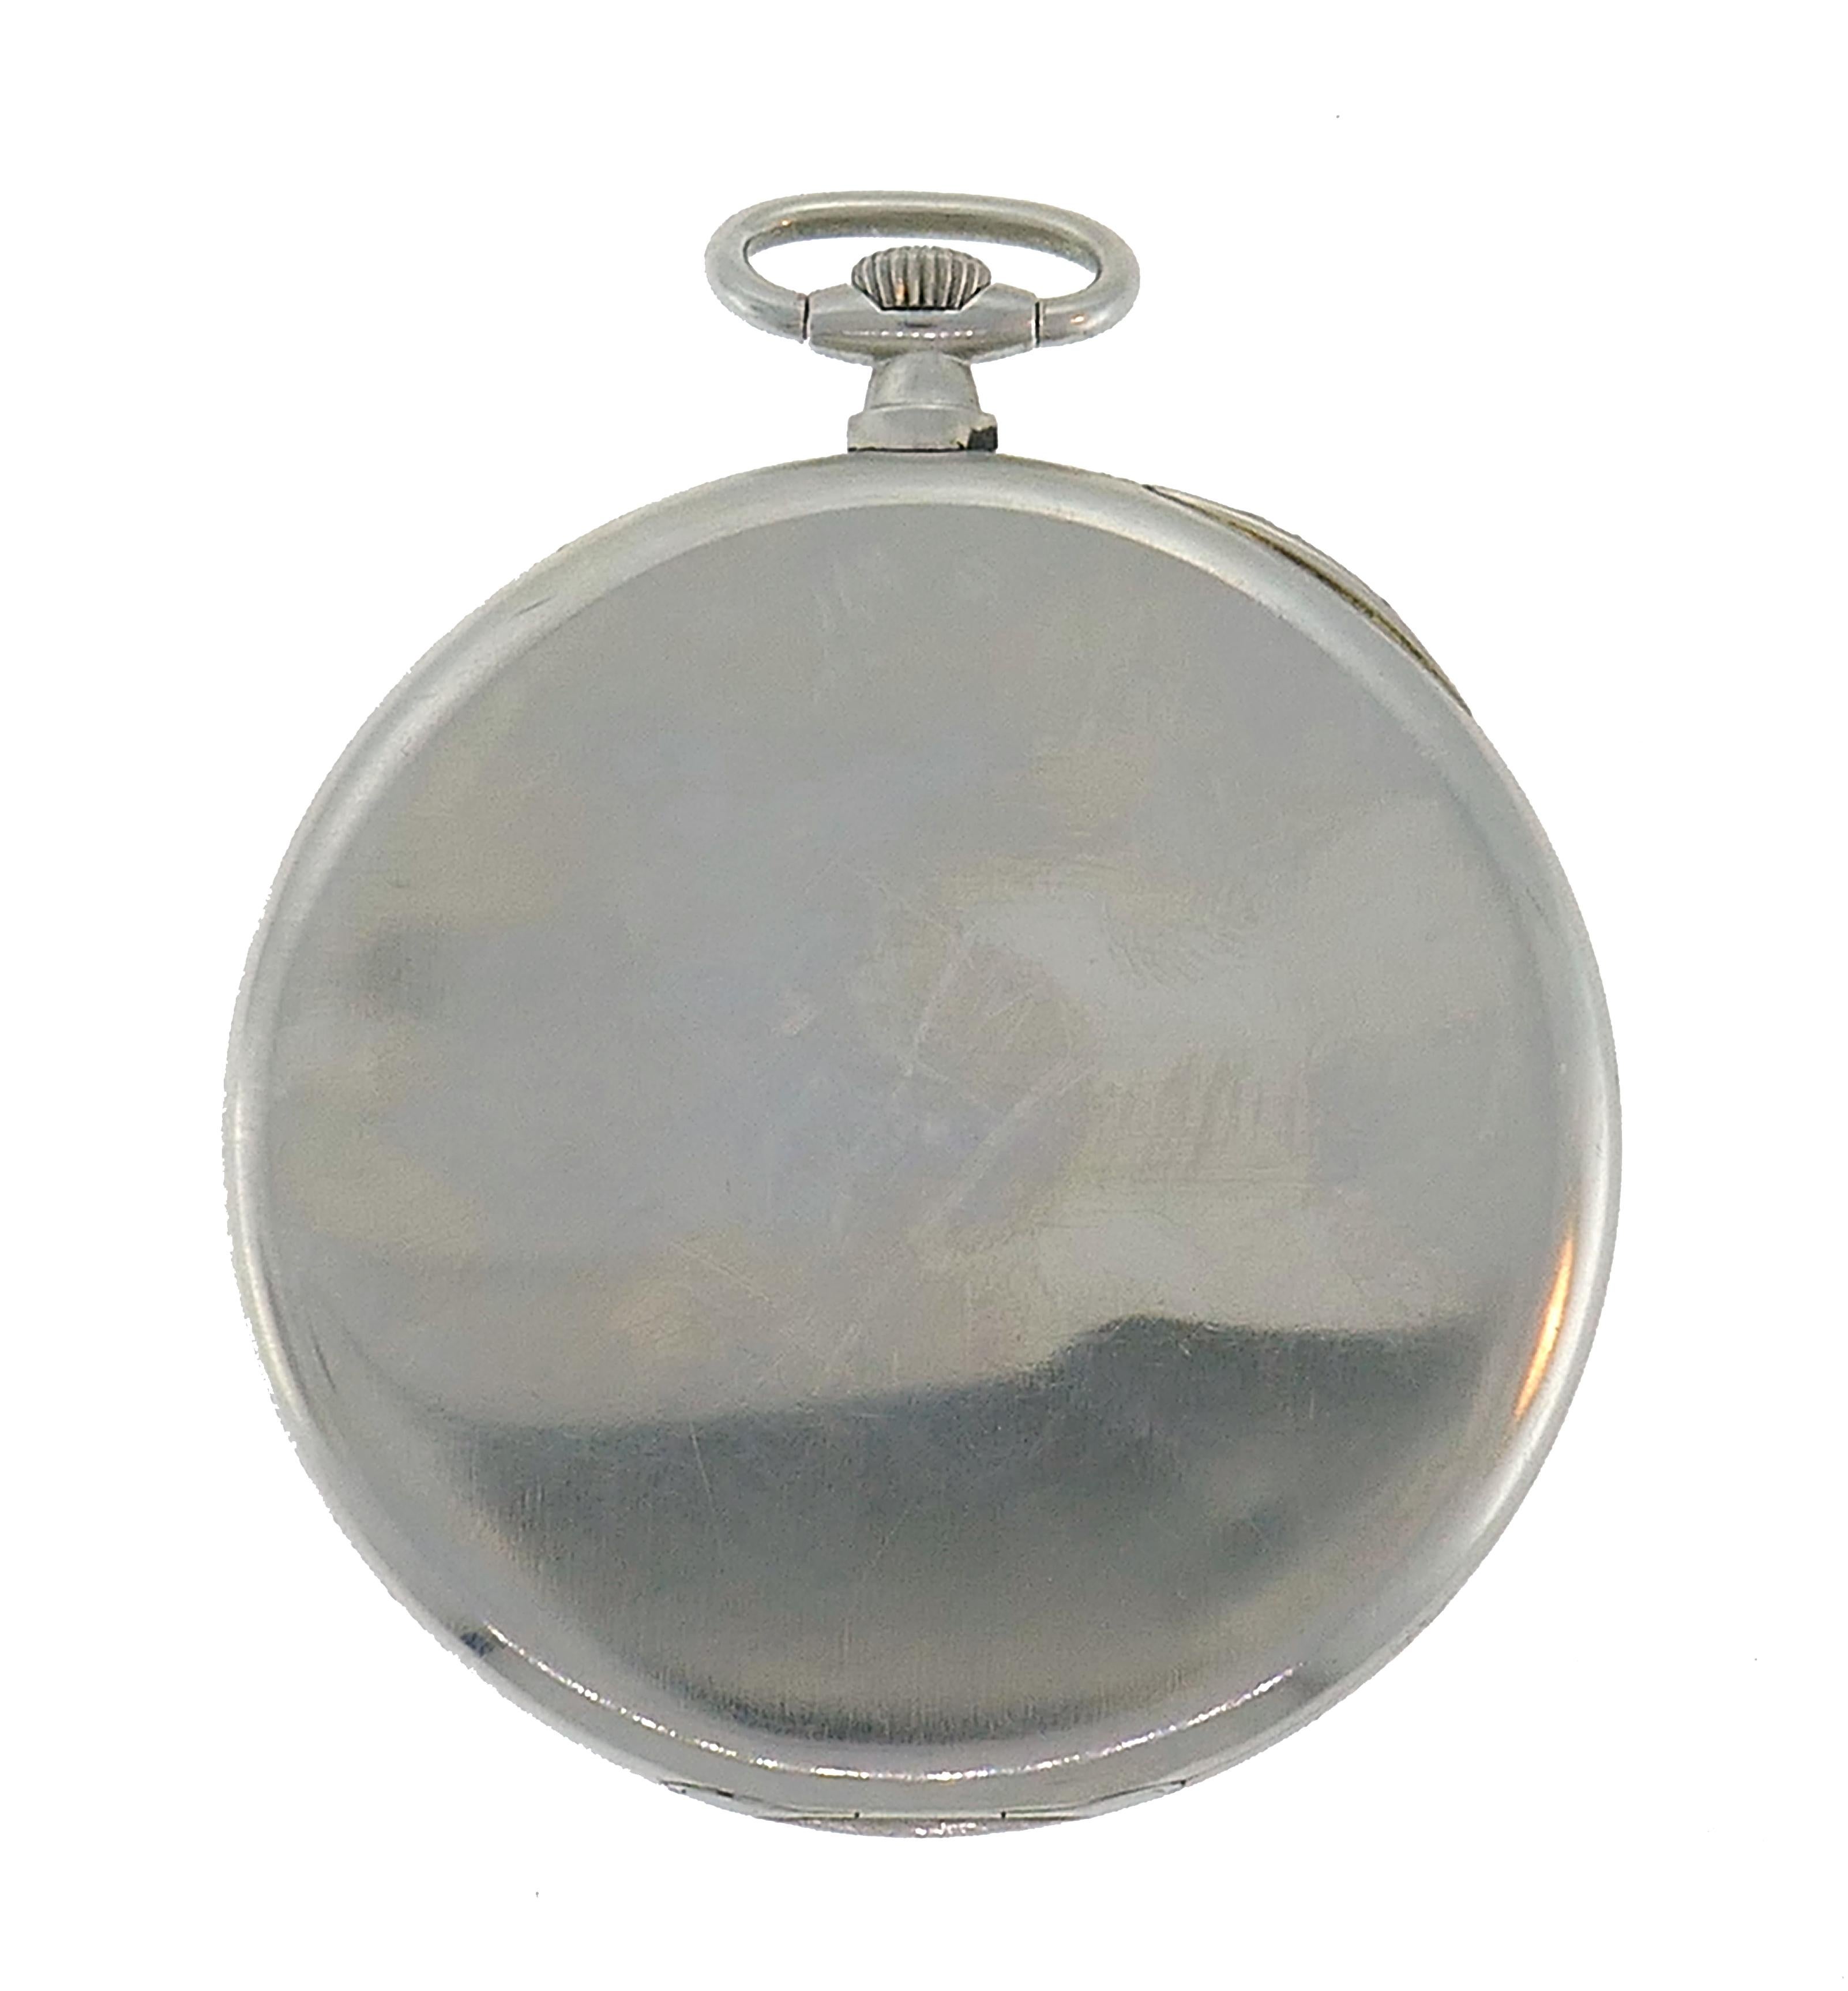 Lovely pocket watch pendant created by Tiffany & Co. in New York.
The watch is made of platinum.
Measurements: diameter 1-3/4 inches (4.5 centimeters).
Weight 62.9 grams.
Movement mechanical, 15 jewels, four adjustments, made by Movado watch